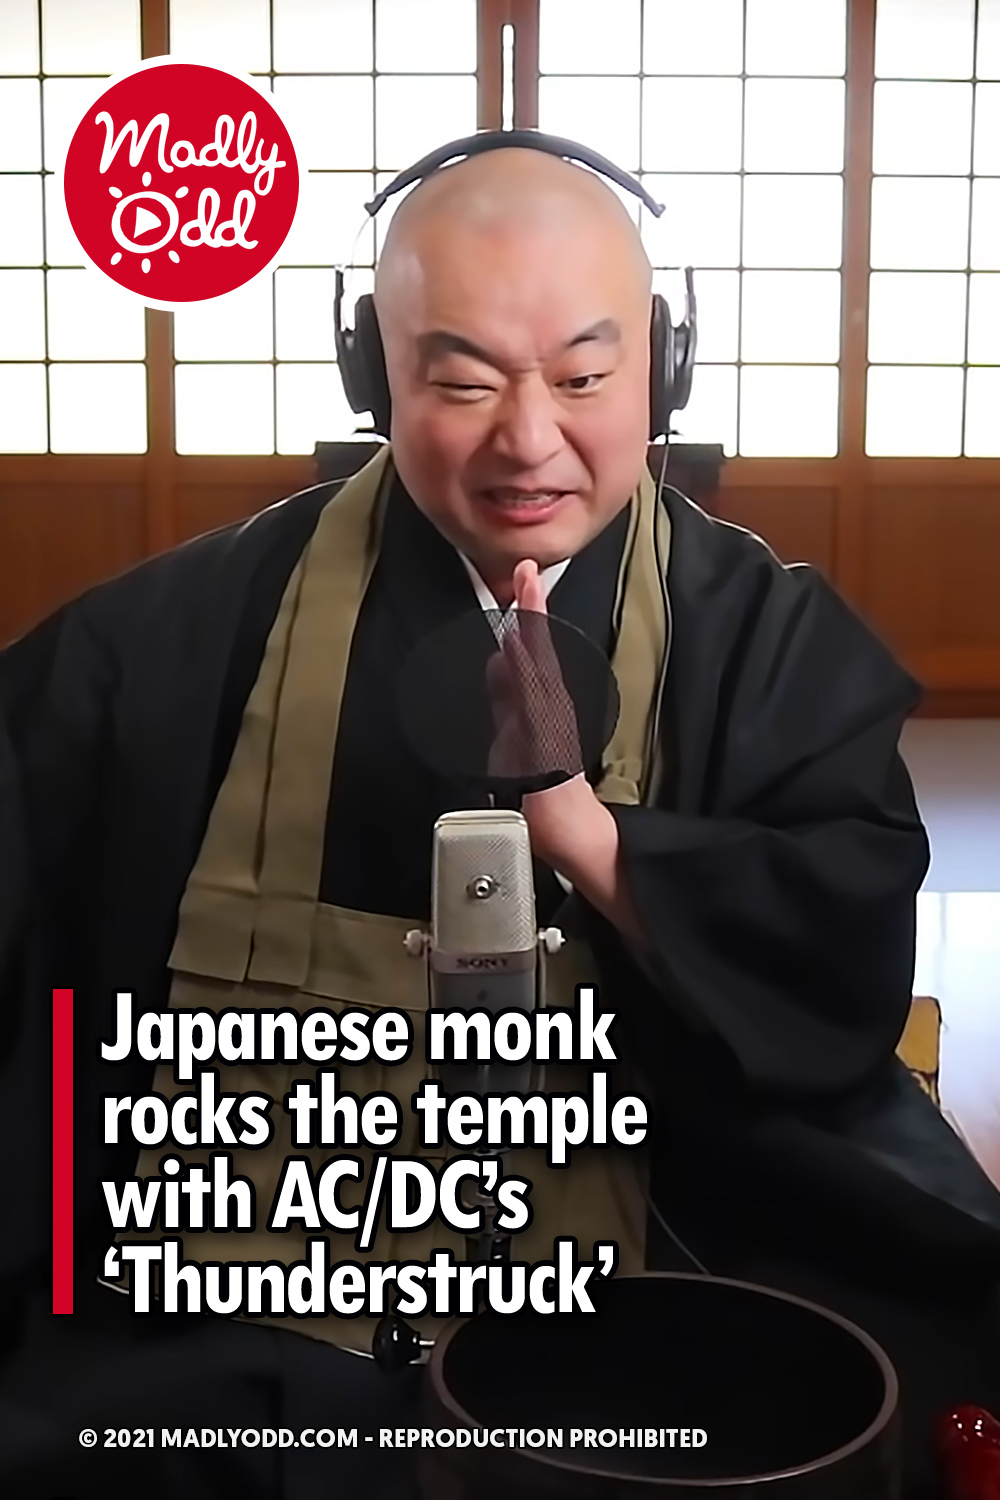 Japanese monk rocks the temple with AC/DC’s ‘Thunderstruck’